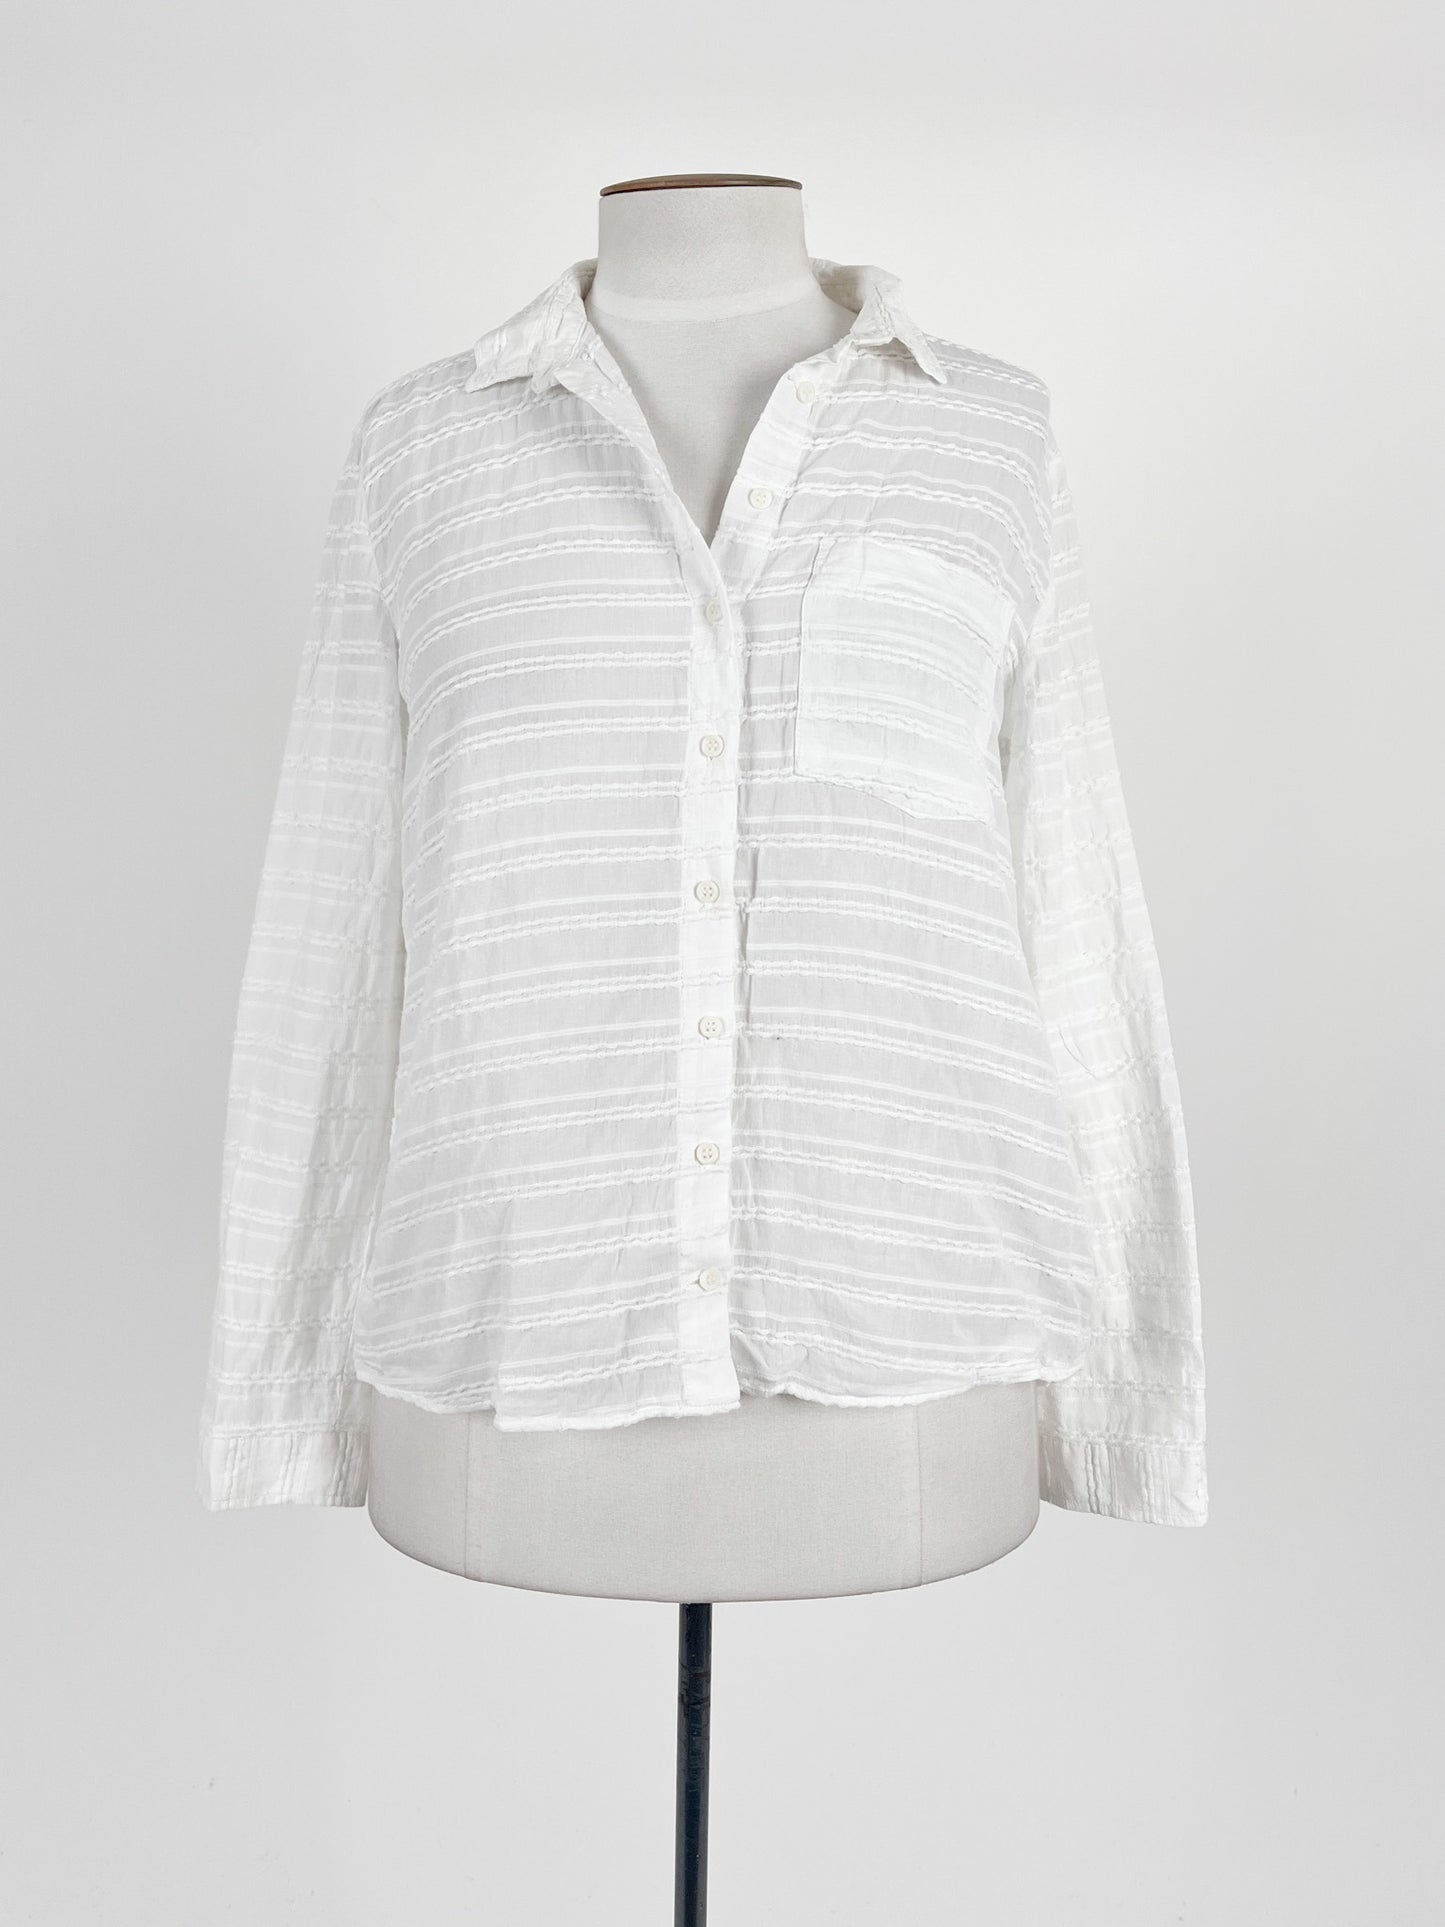 LCW Casual | White Casual/Workwear Top | Size L